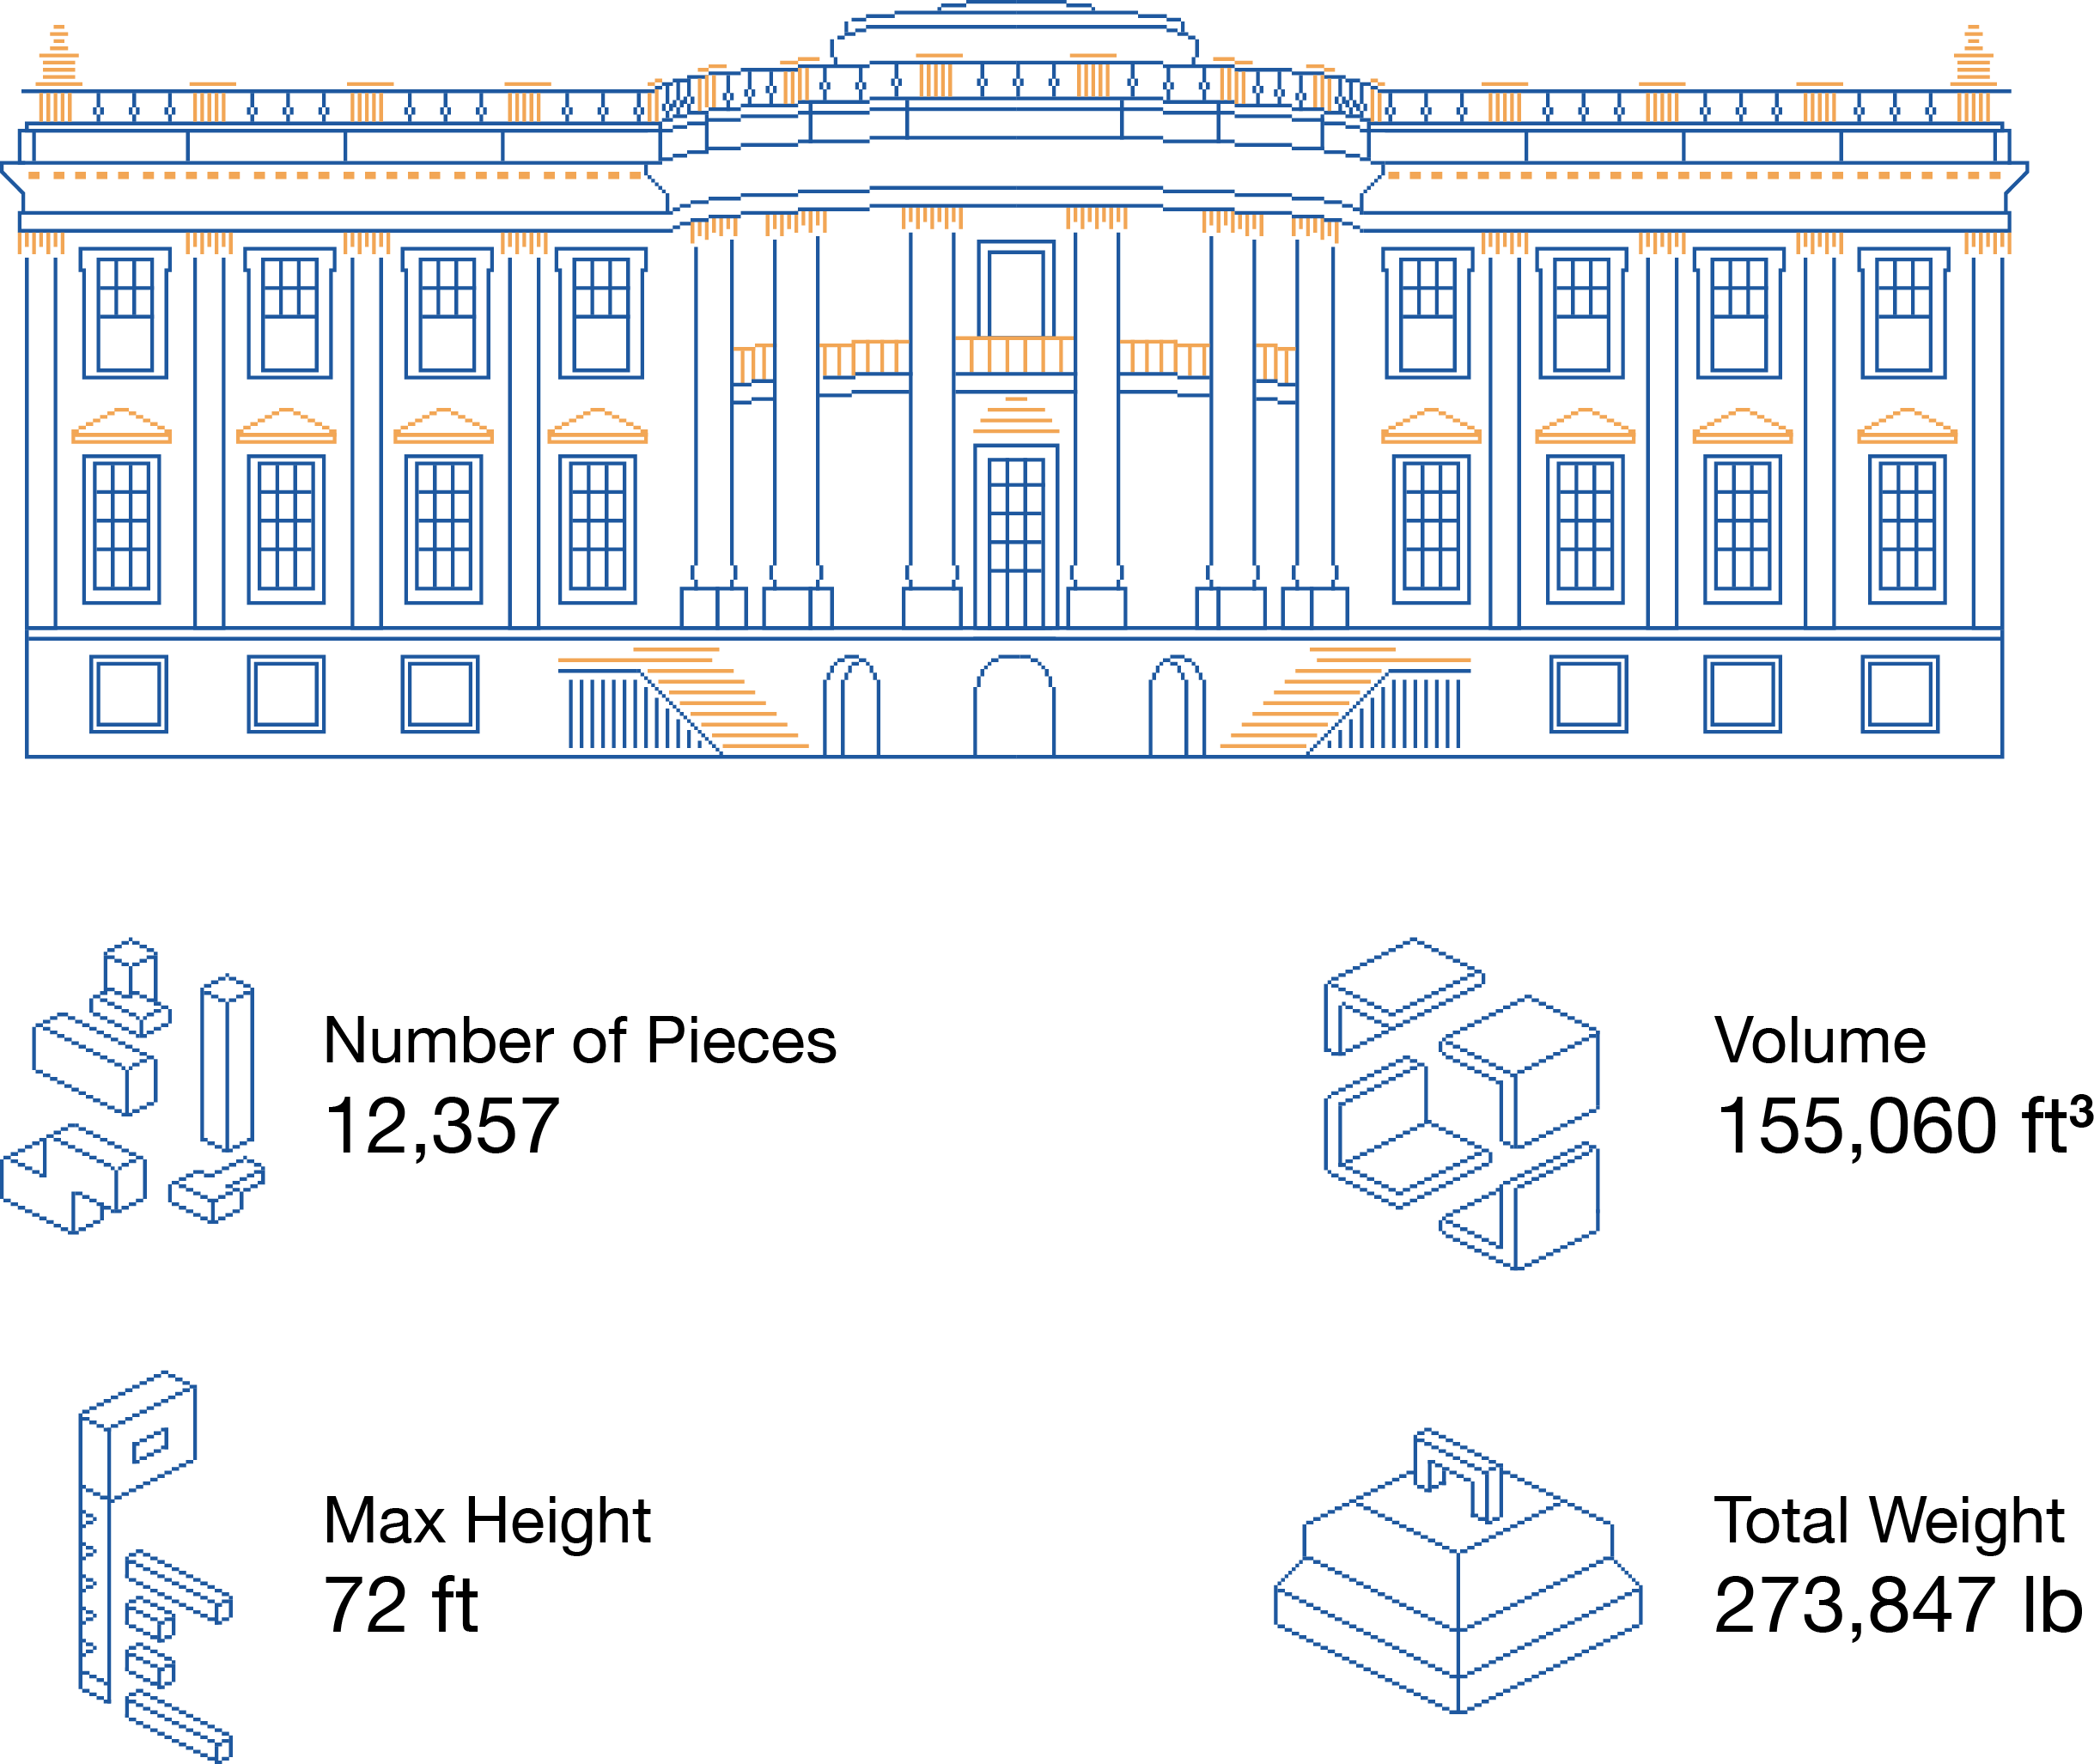 Estimated scaffolding requirement for the United States White House.